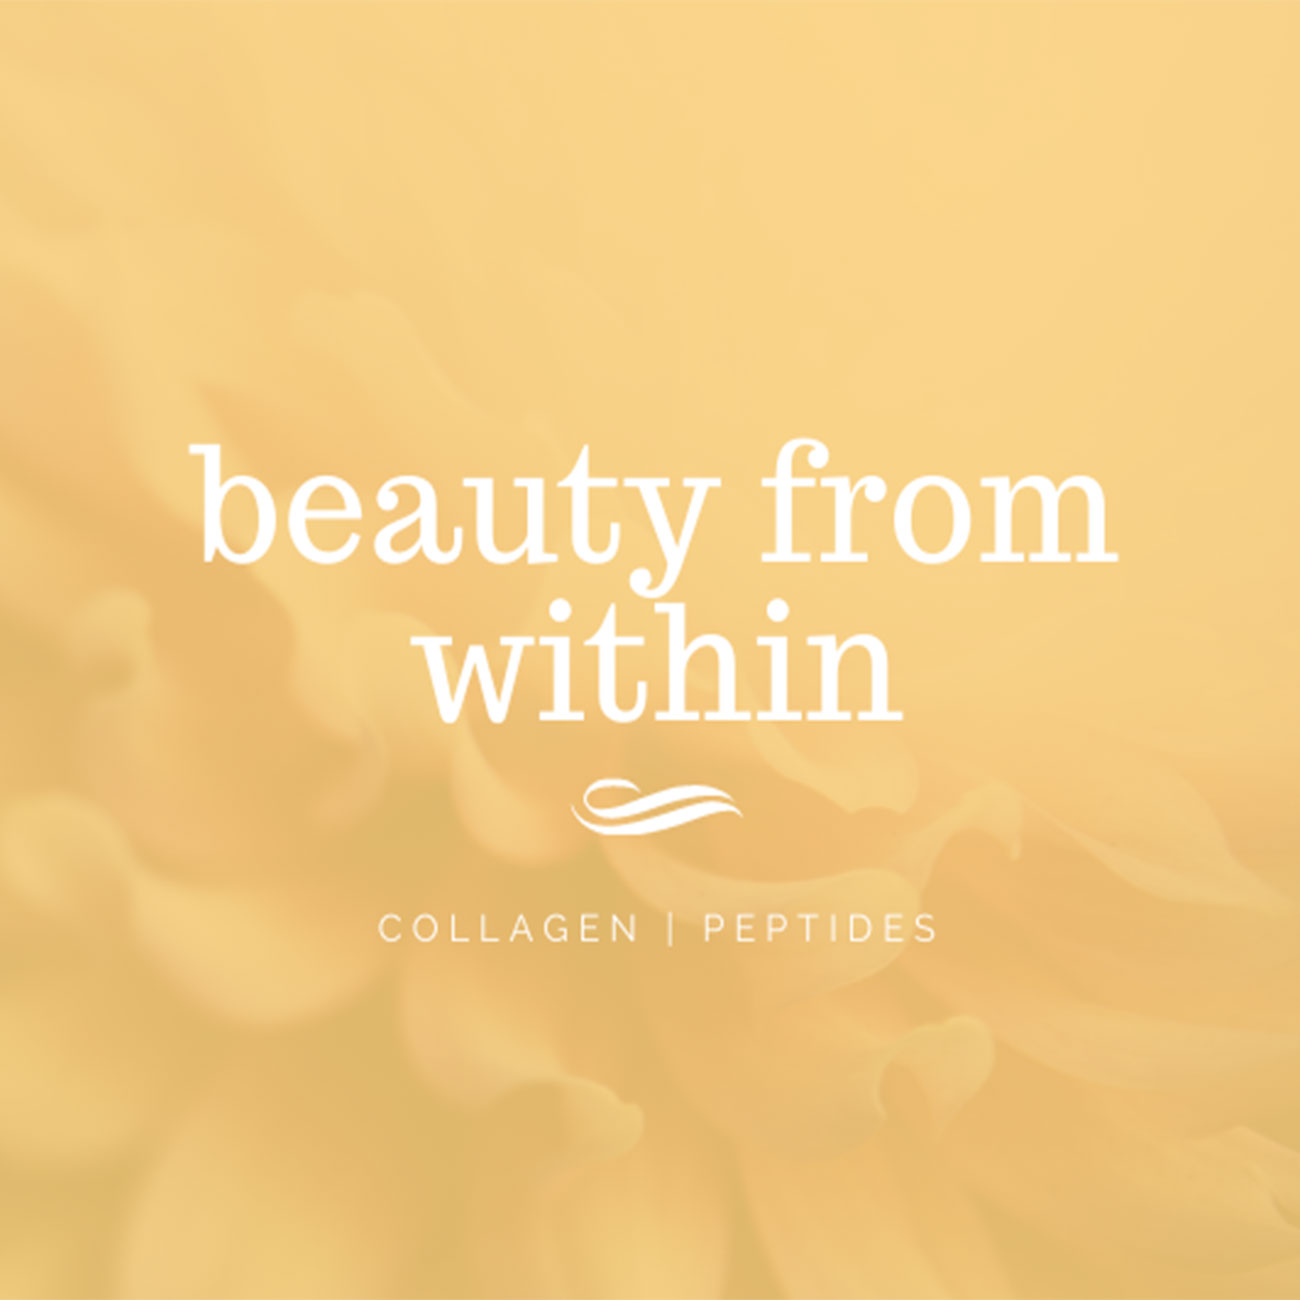 Beauty from within slogan